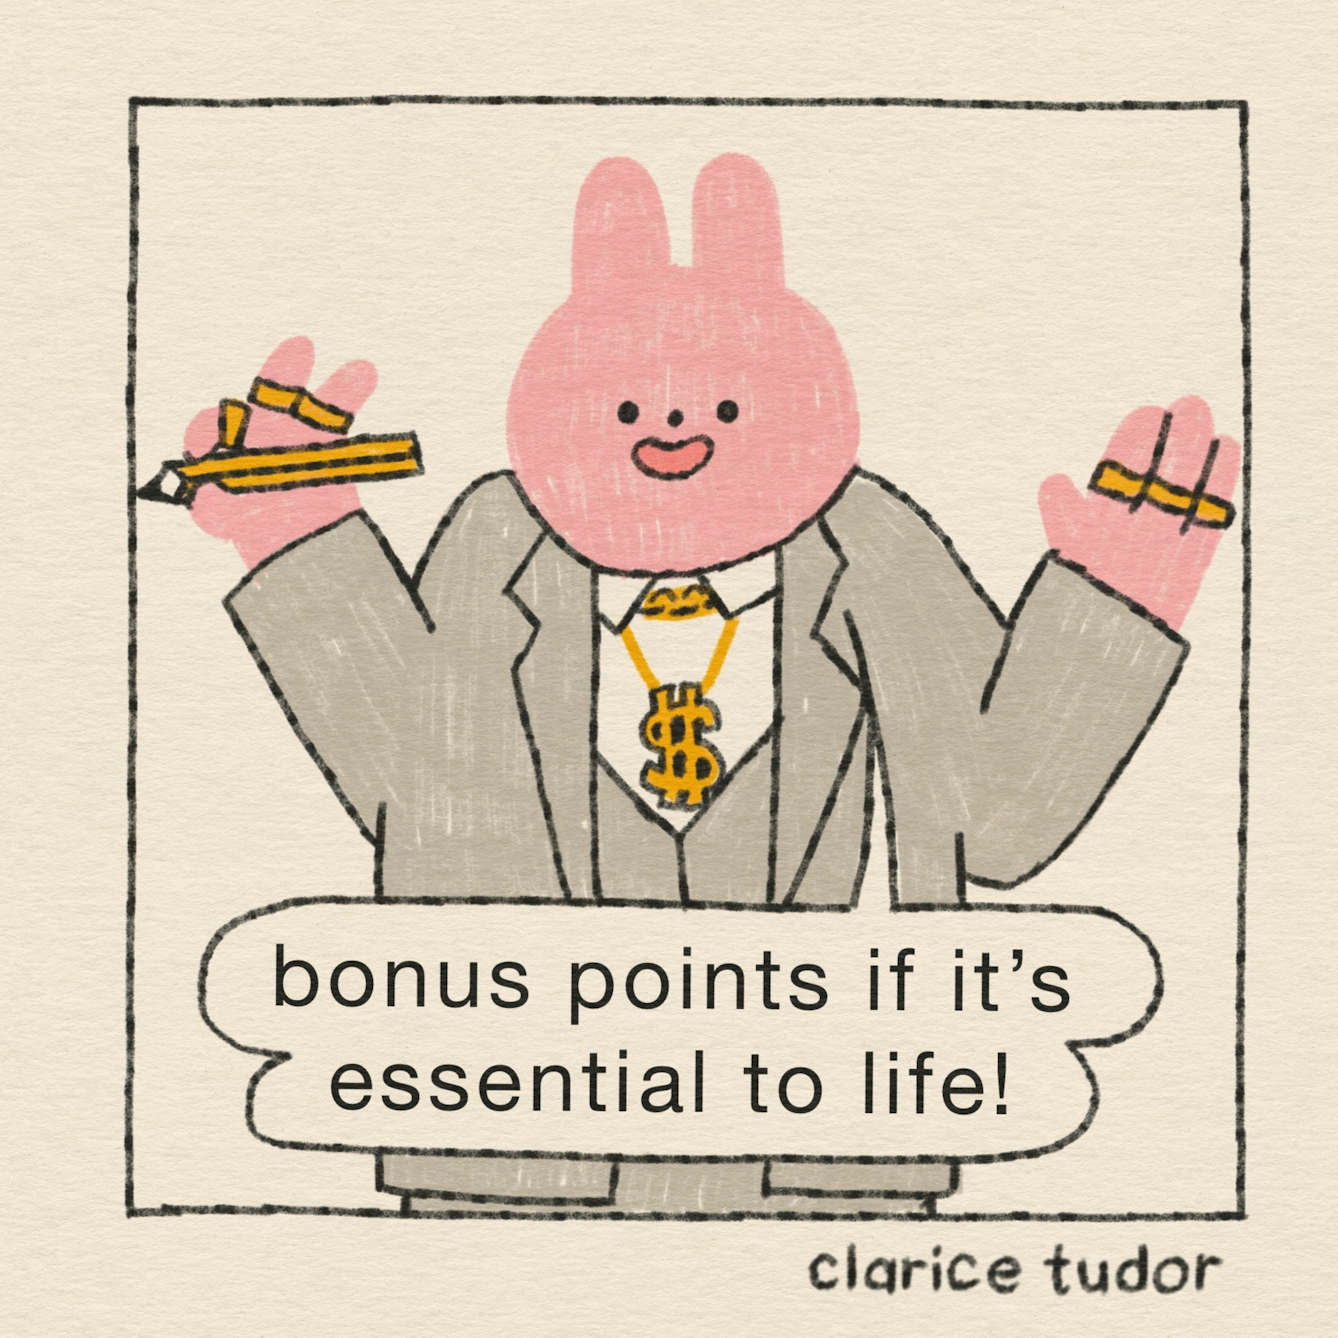 Panel 4 of 4: “Bonus points if it’s essential to life!” he adds, with his hands in the air and a smile on his face. 